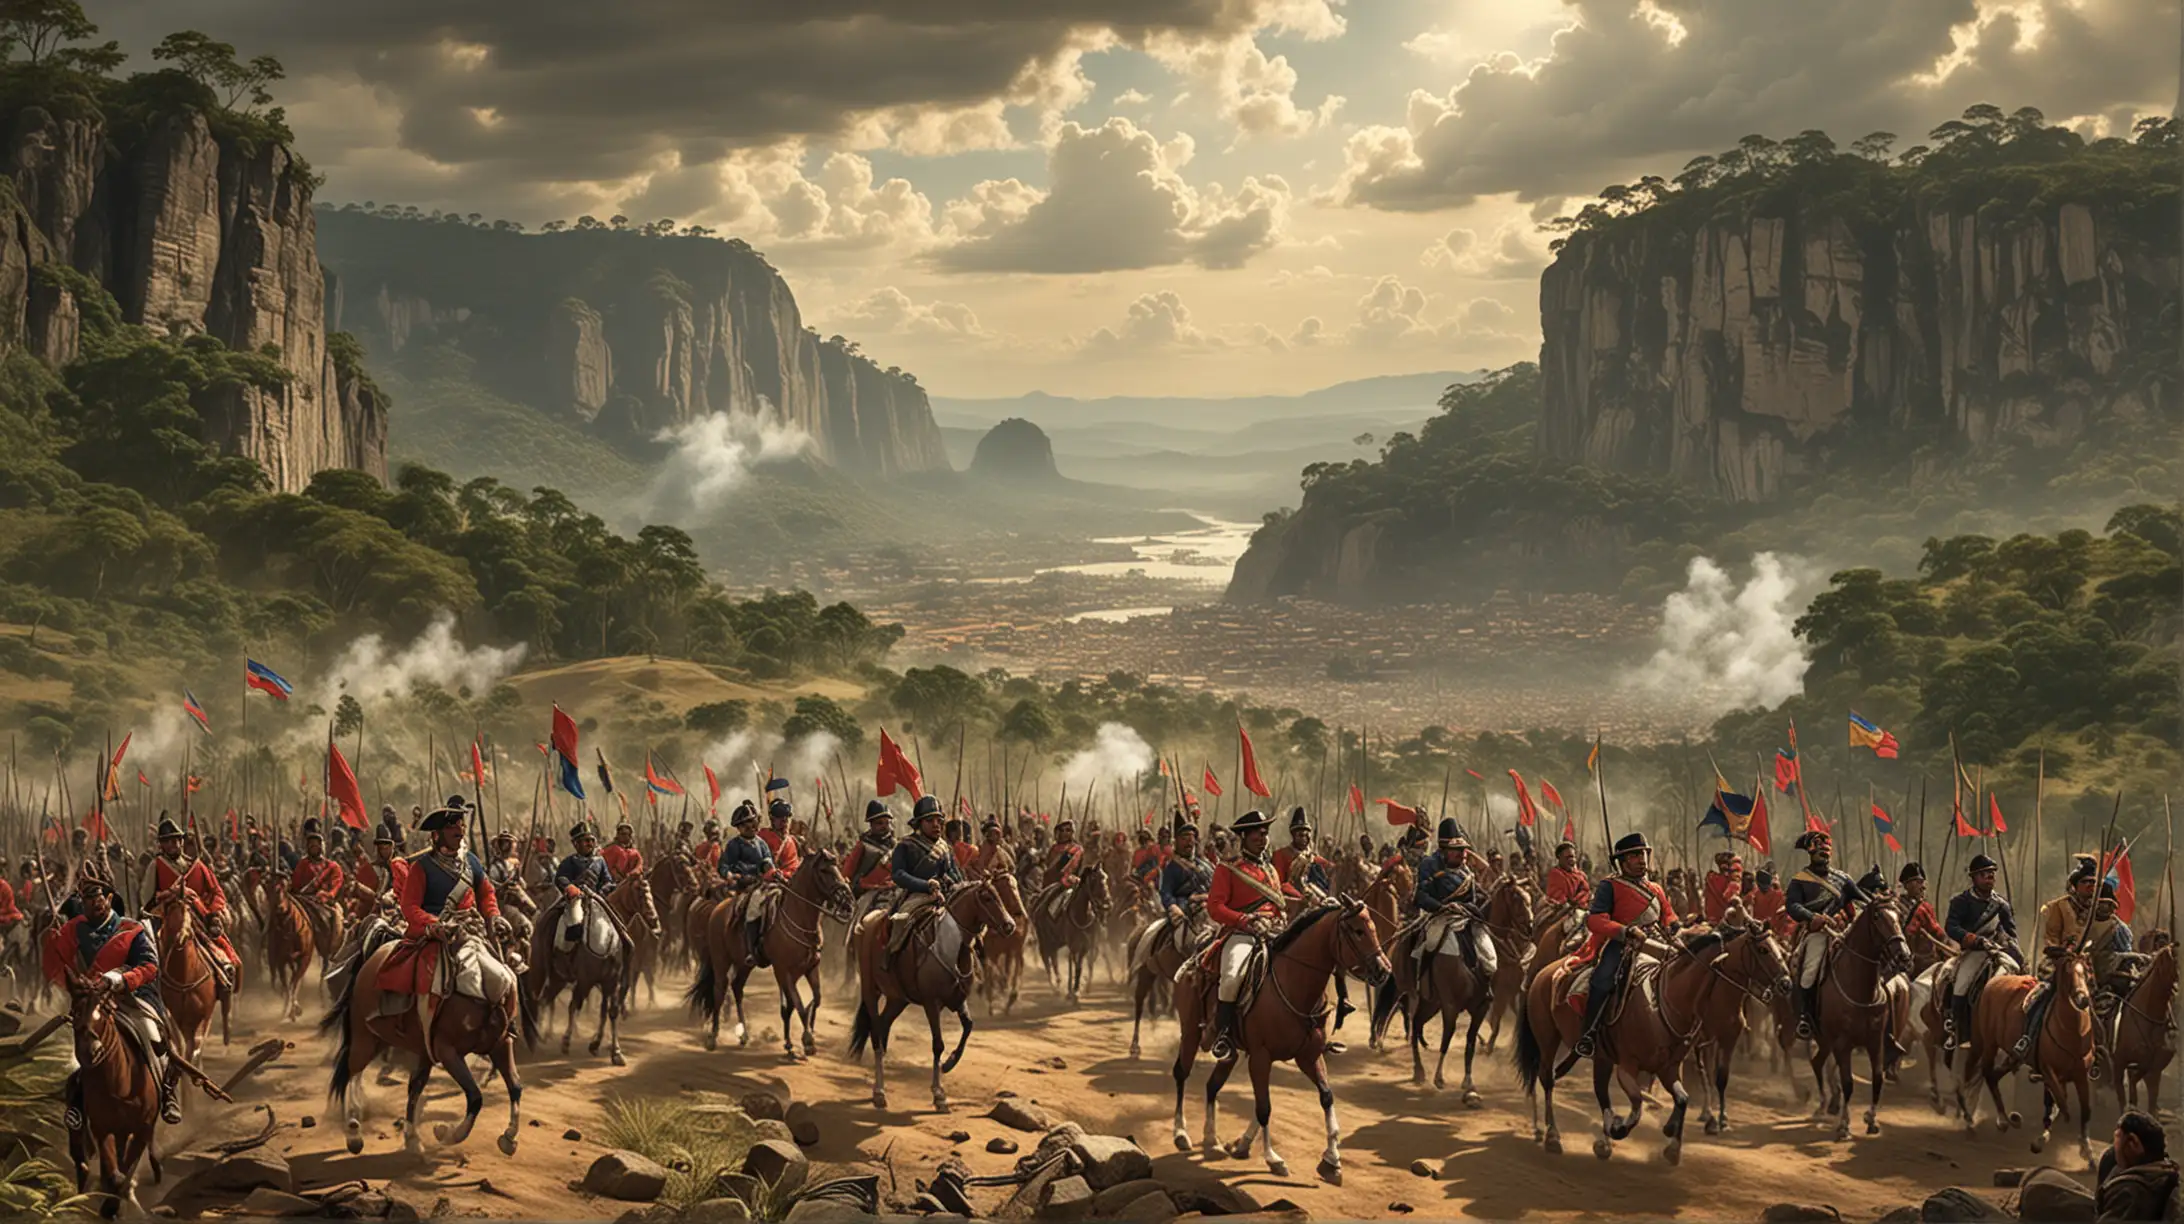 Visualize Bolívar's pivotal campaigns that shaped the fate of Gran Colombia:

Image Description: Create a sweeping panoramic view of Simón Bolívar leading his troops into decisive battles across the rugged landscapes of South America. Bolívar is depicted on horseback, his sword raised high, as his army marches triumphantly behind him, symbolizing the relentless pursuit of liberty and unity that defined the campaigns of Gran Colombia.